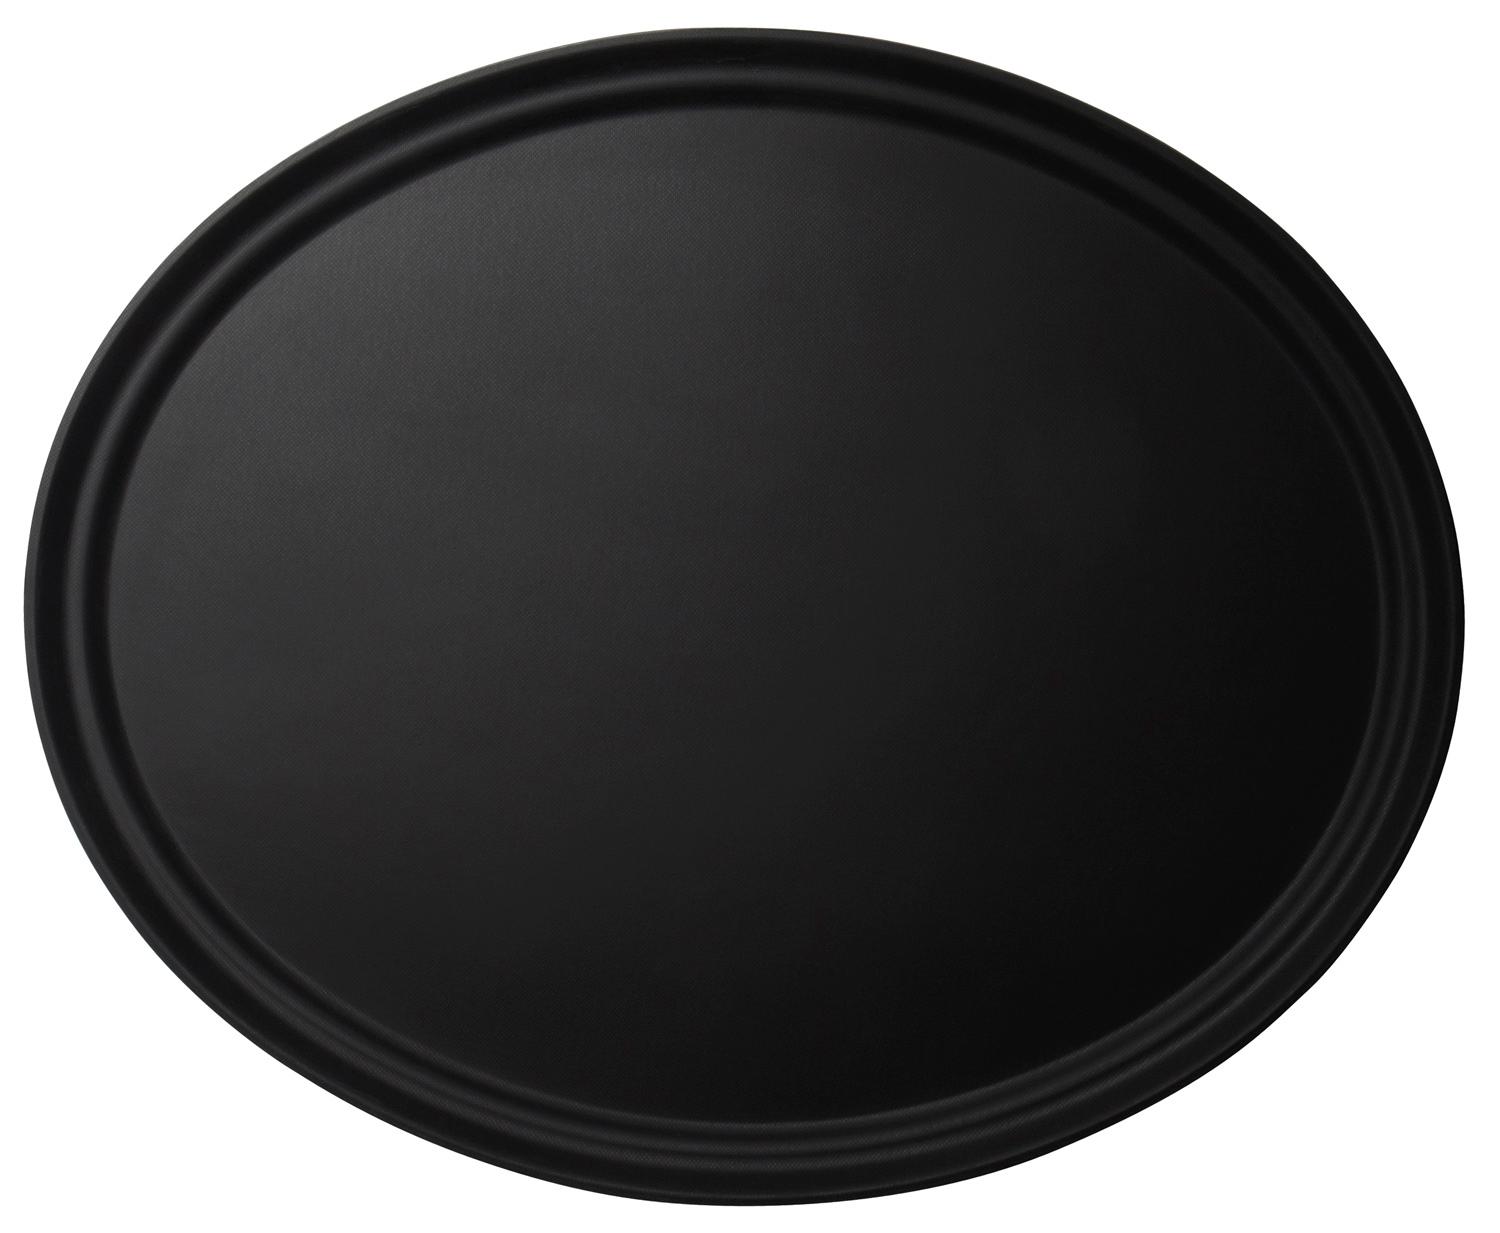 Camtread serving tray, oval, non-slip surface, black, 560x685 mm